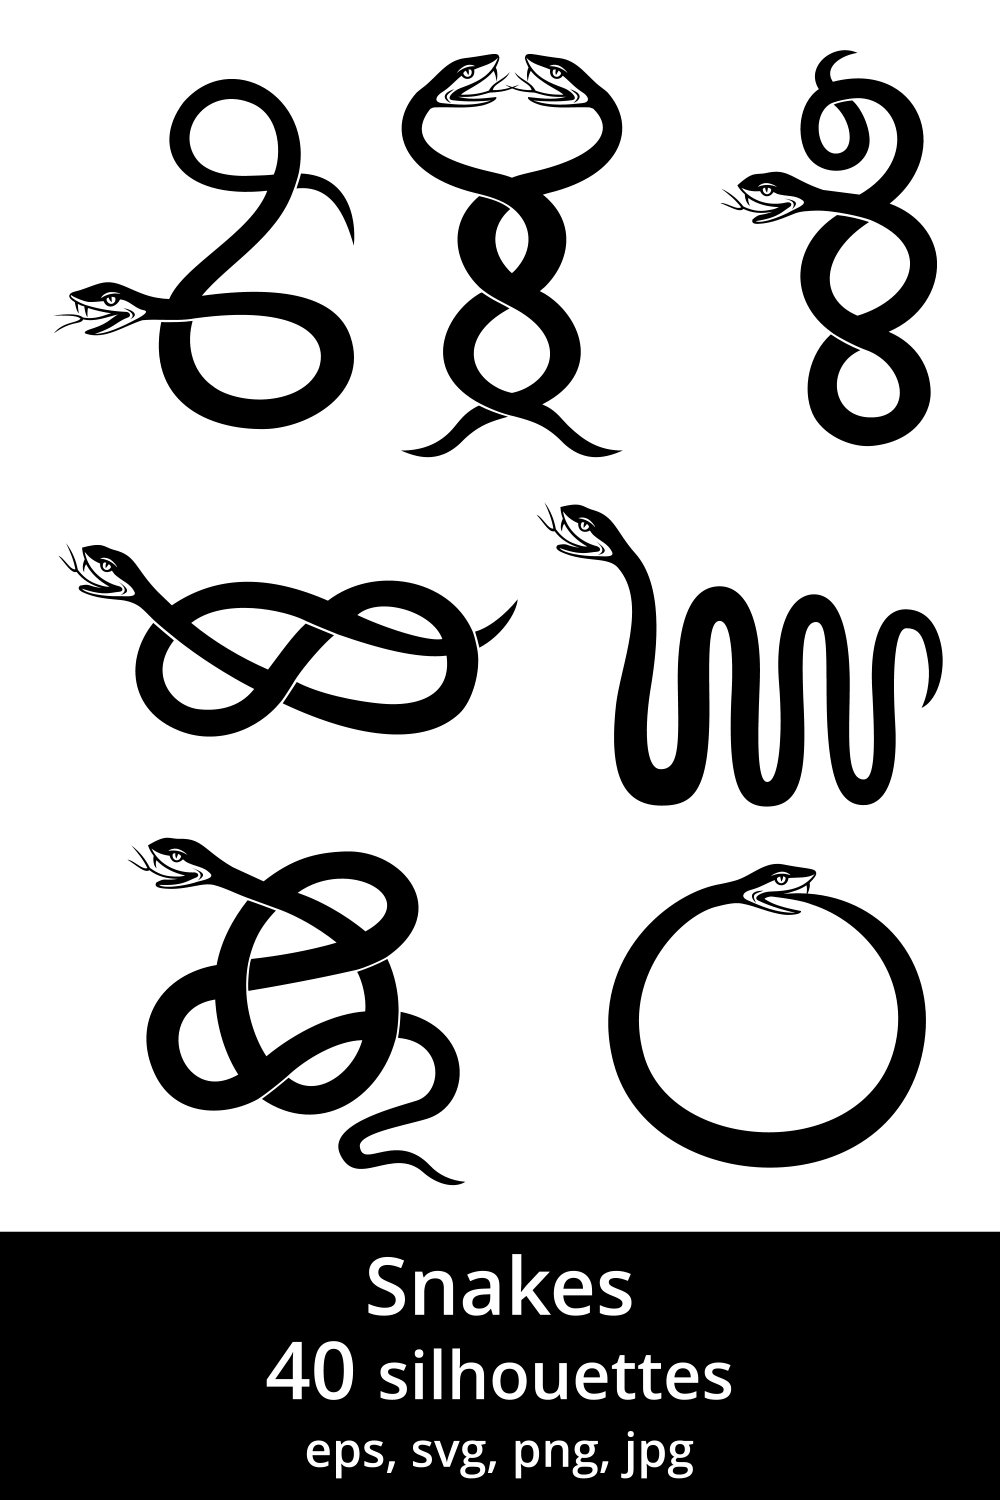 Snakes and snakes with the words snakes written in black on a white background.